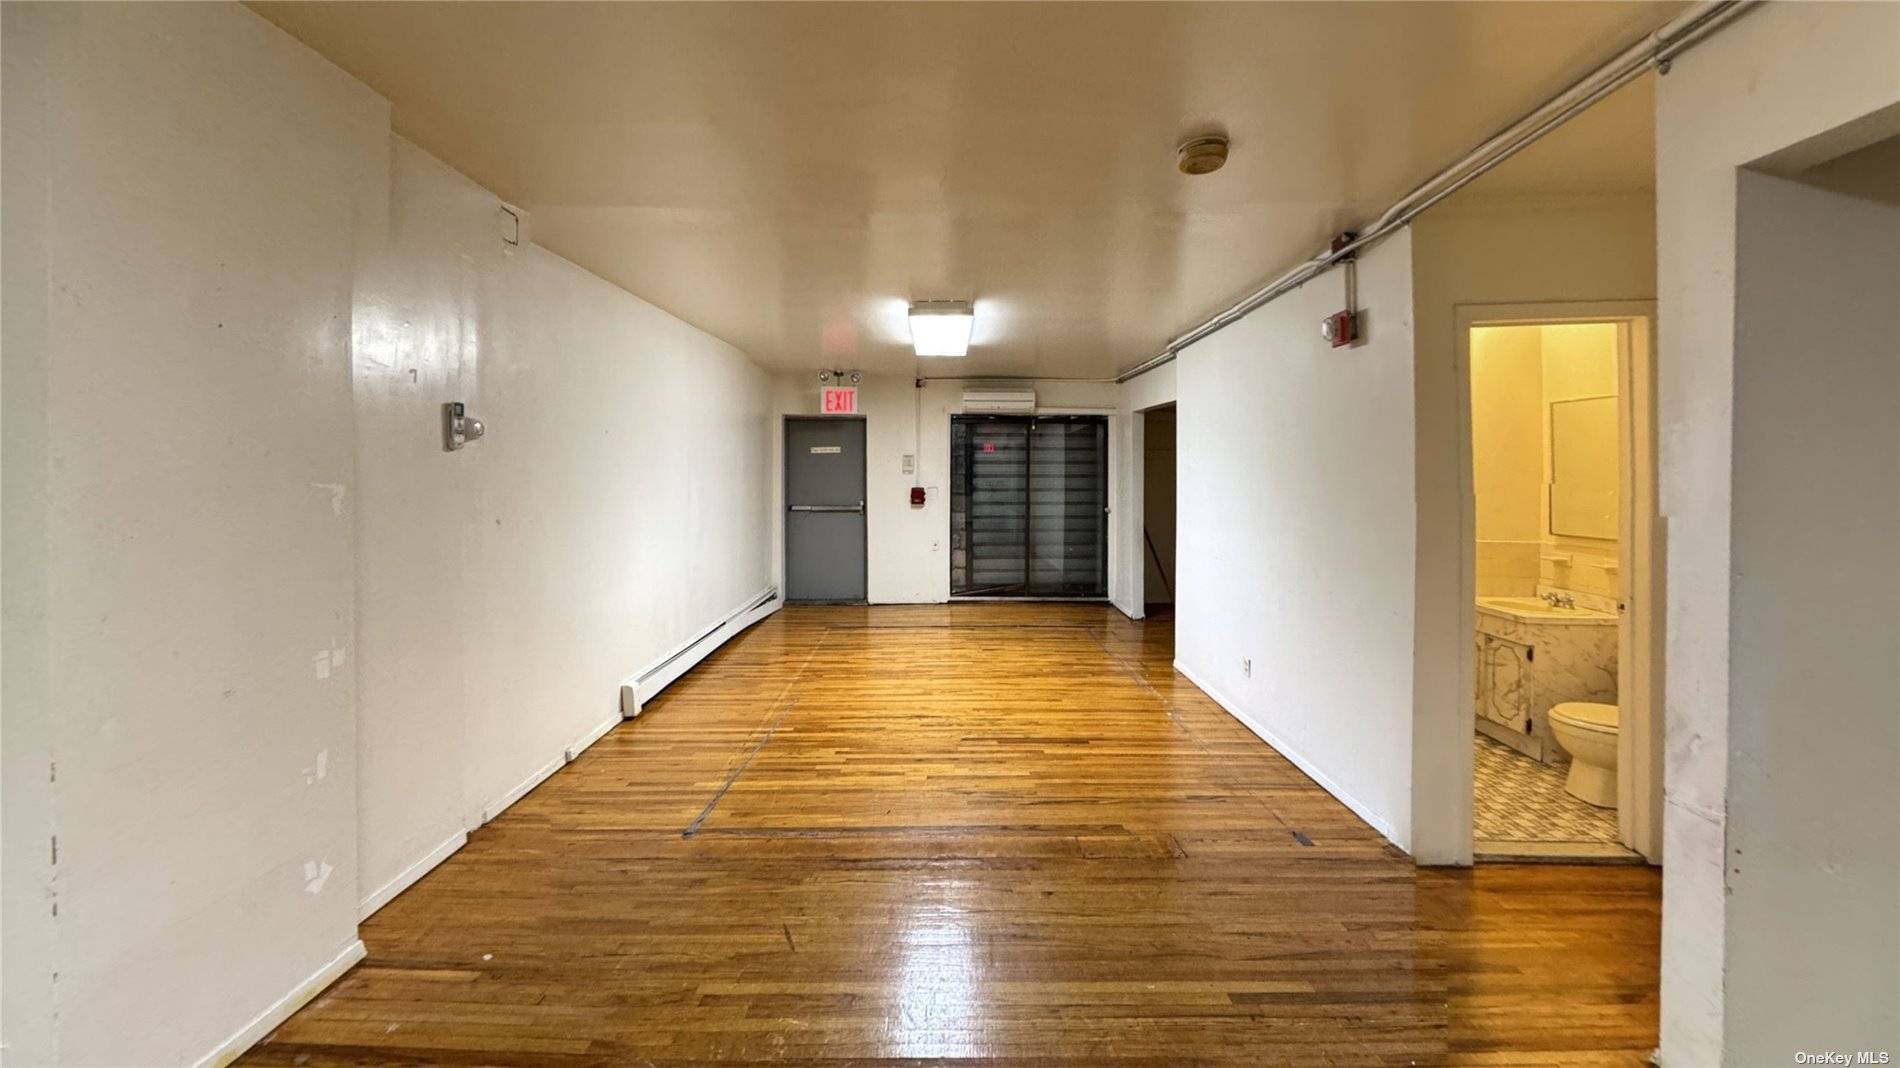 Welcome to Hillside Jamaica's Hottest spot Great opportunity to Lease an entire floor of approximately 1388 SF at the heart of Jamaica Hillside, within walking distance of every conceivable convenience ...